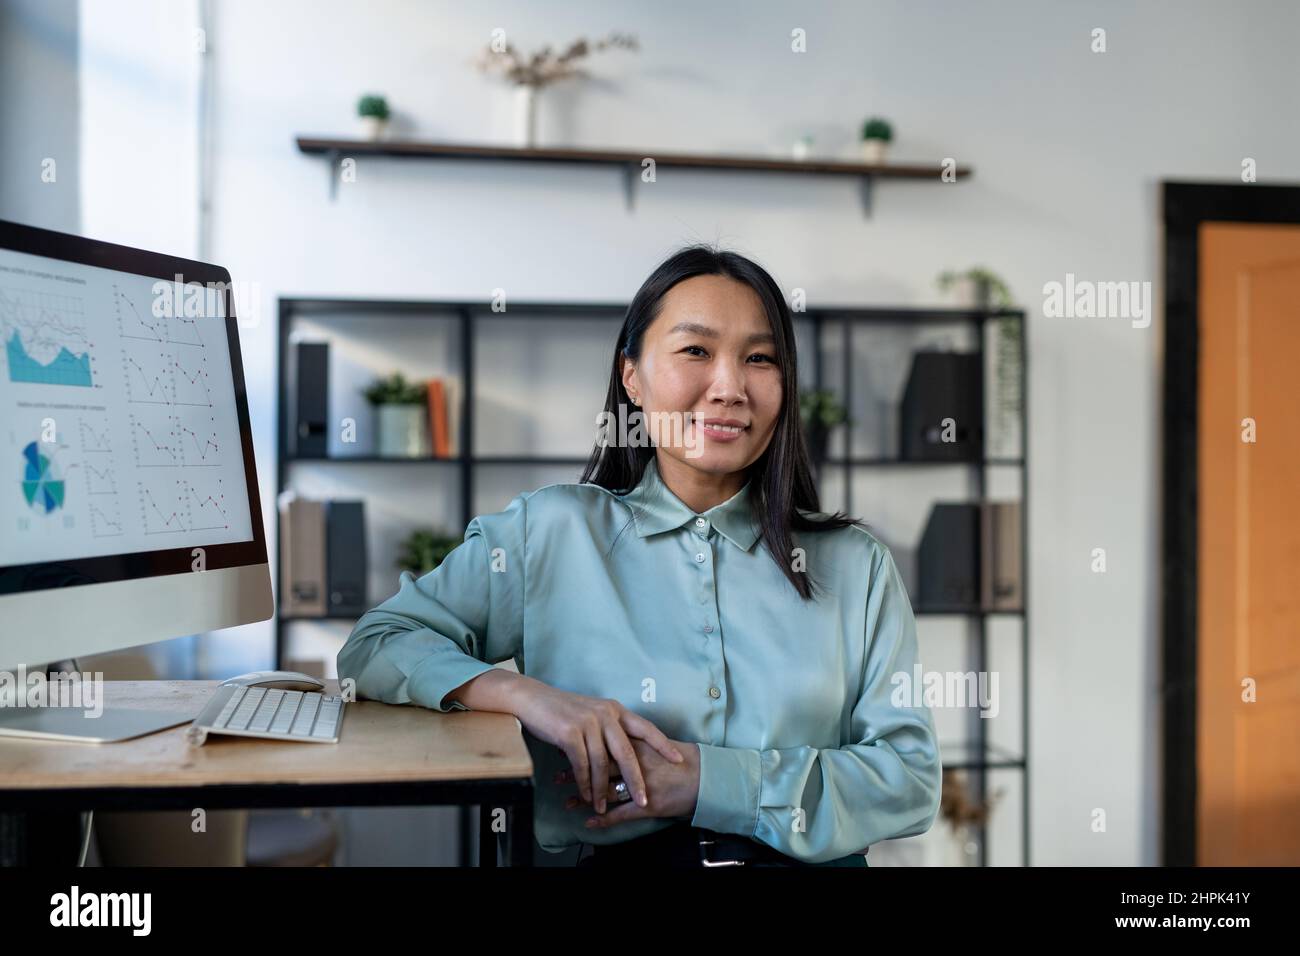 Young Asian female economist in smart casualwear standing by workplace with computer monitor and financial data on screen Stock Photo